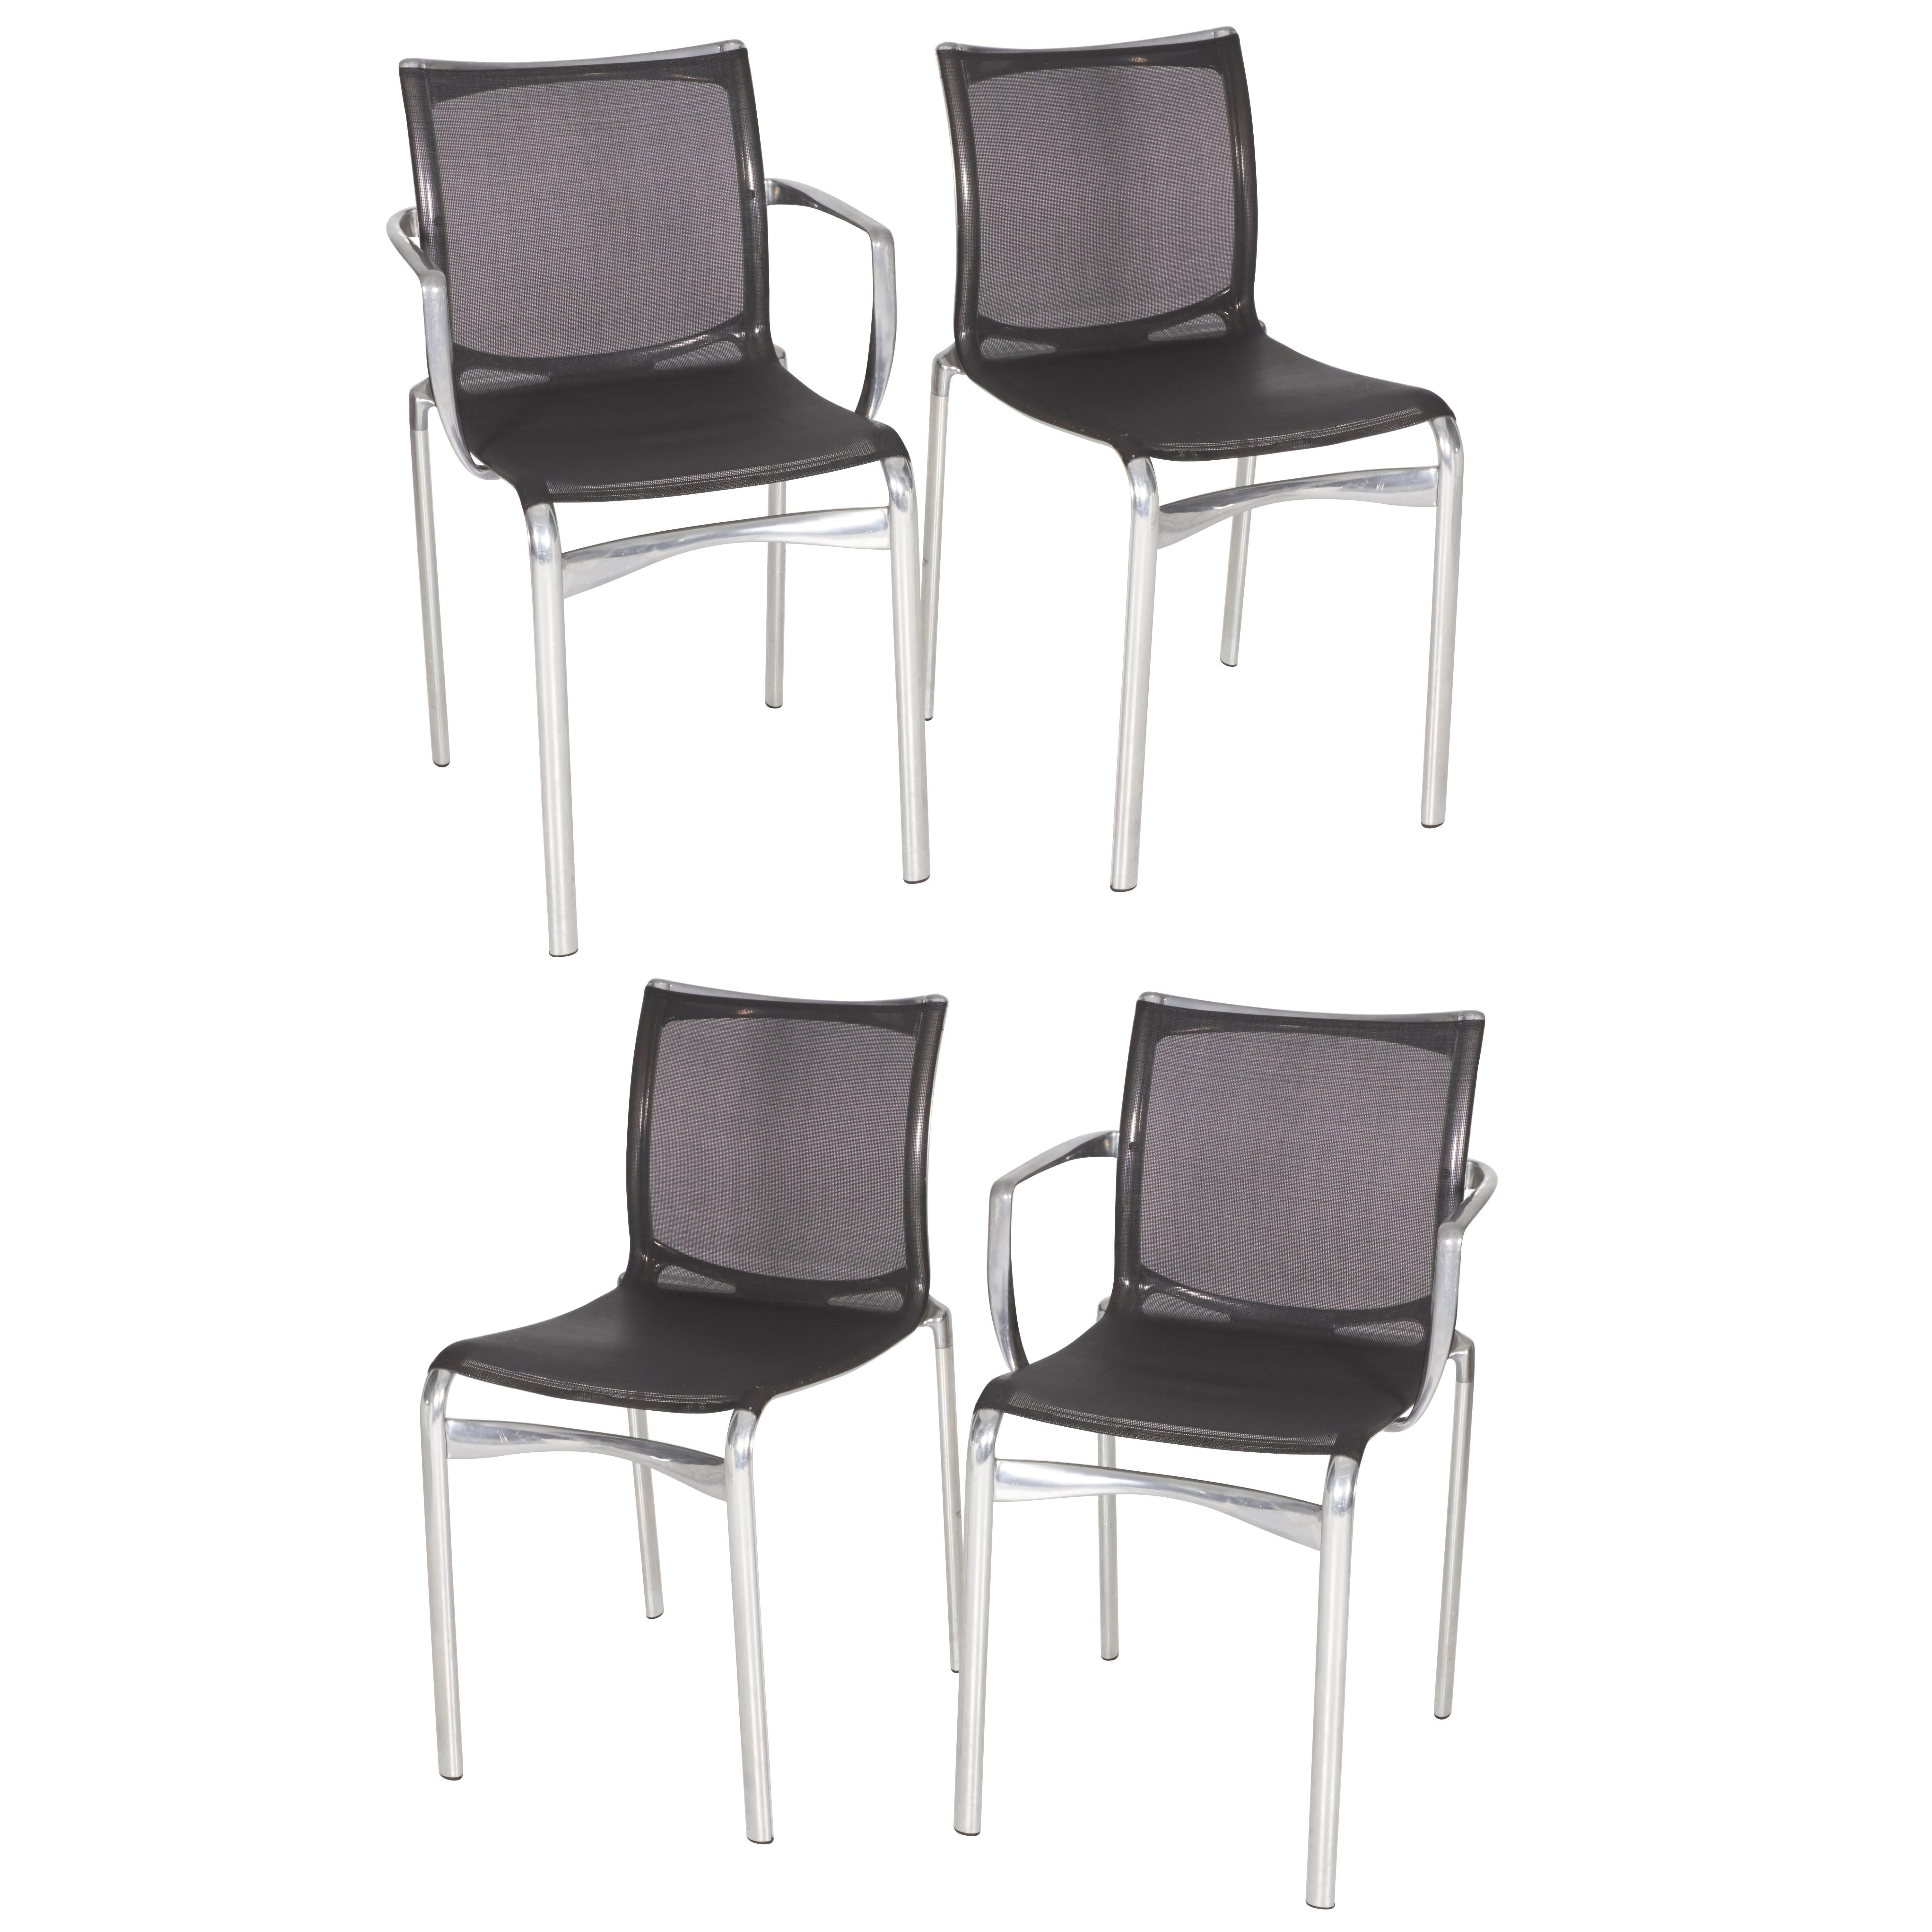 Steel frame arm and side chair with black nylon mesh seat and back rest.
Arm and side chair purchased as a set: $575.00.